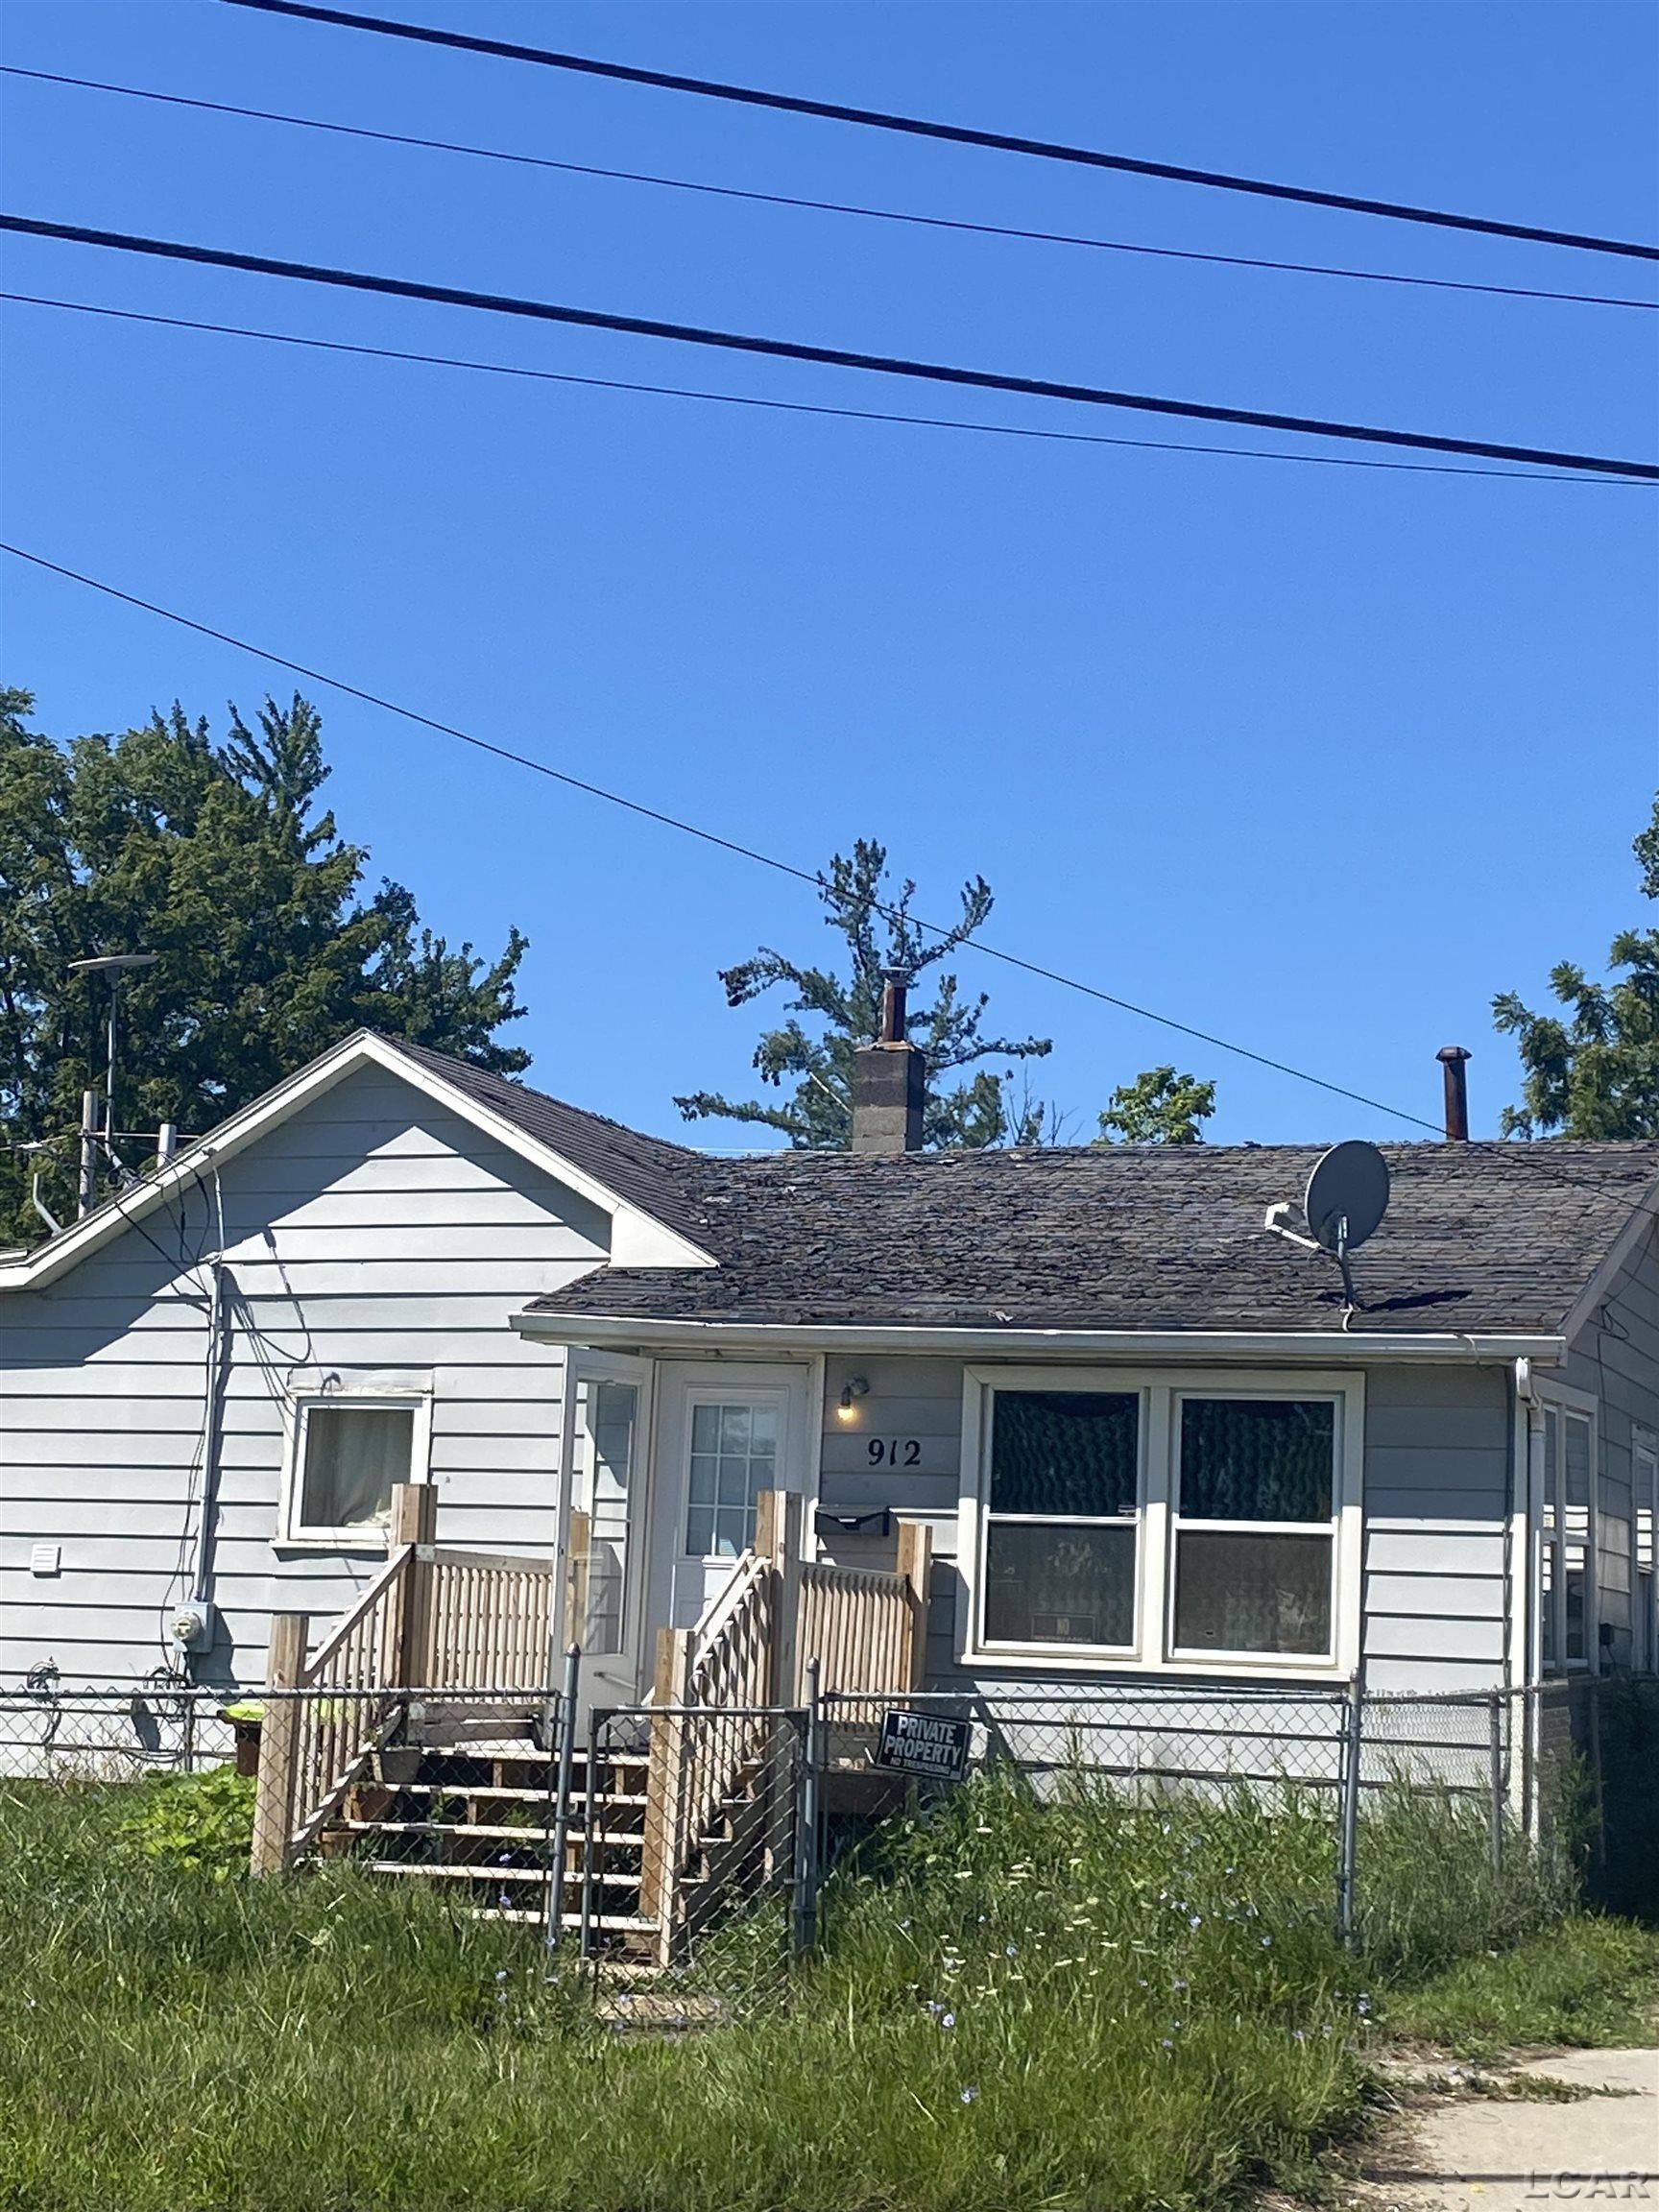 Check out this great investment property in Adrian! Great home to fix up and add to your portfolio, or to live in. This home has a fenced in yard, full basement, and and is close to the city! This home will be a Minimum Bid Auction of just $9,000 on Tuesday September 19th, at 4 PM. Preview and registration will begin at 3 PM. Please call the office at 419-867-7653 with any questions.